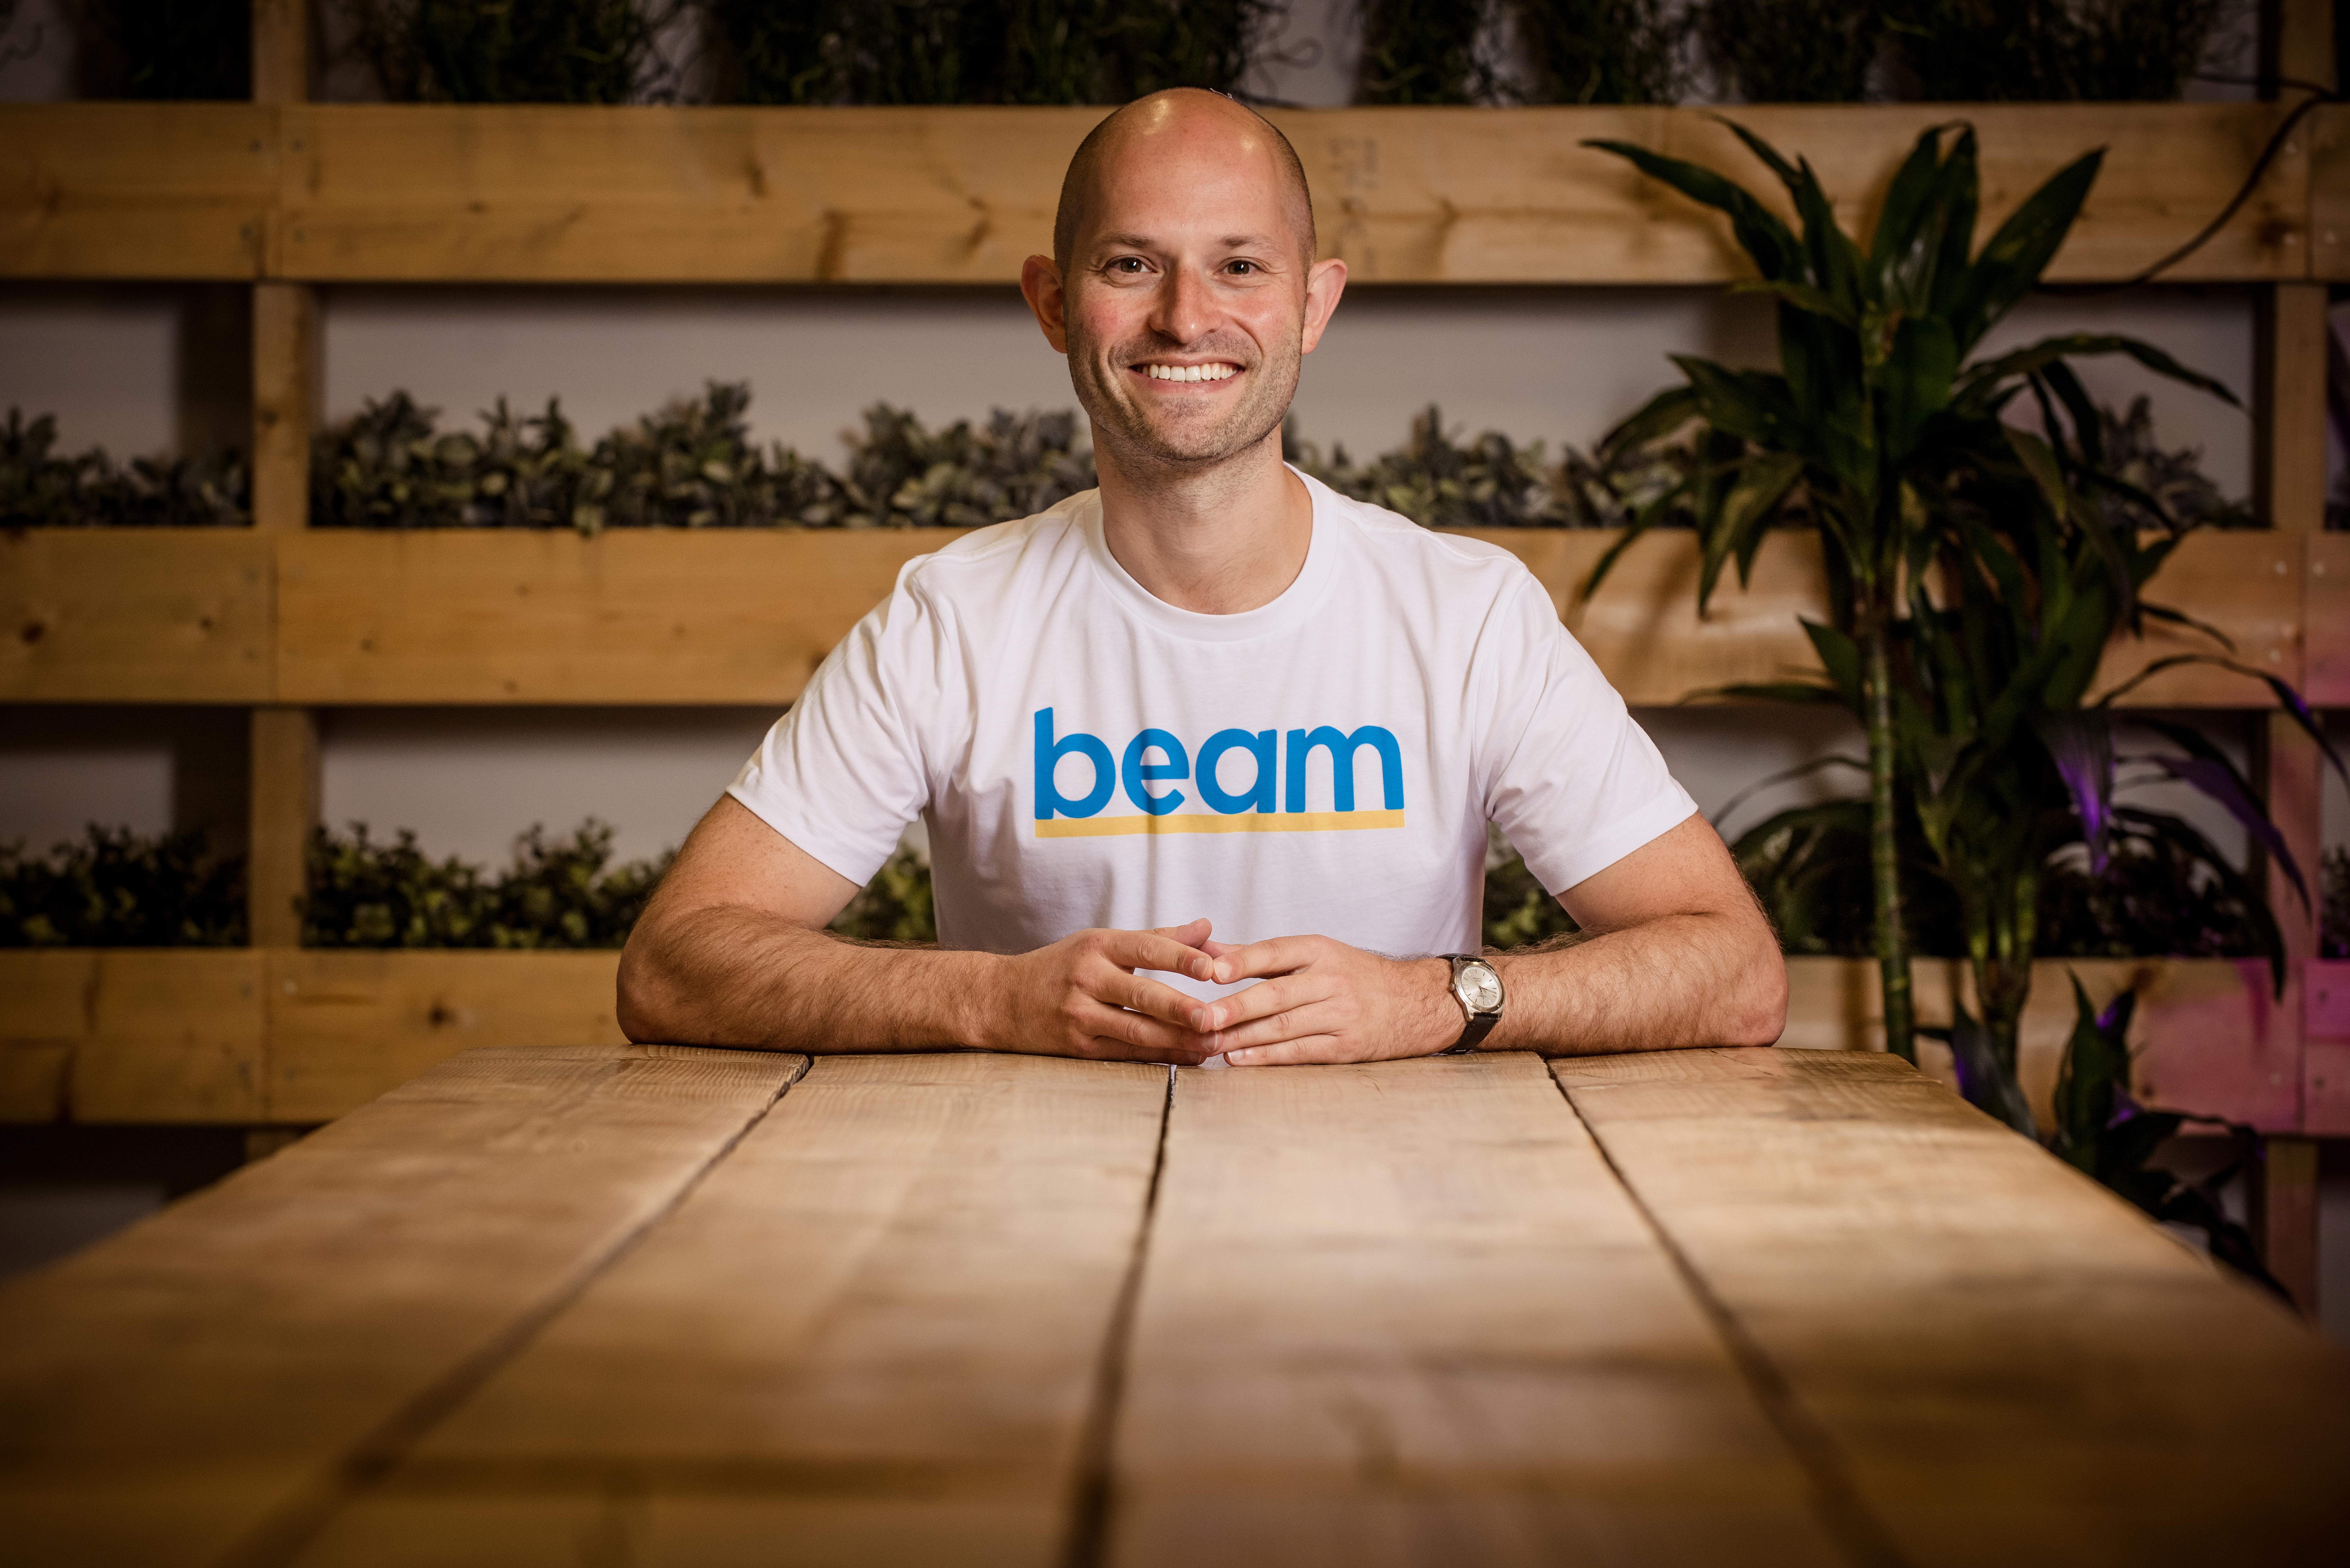 Alex Stephany, the founder of BEAM, the homeless crowdfunding platform, standing at what appears to be a wooden table directly facing the camera, with his arms and elbows resting on the wooden planks of the table, the lower part of his body is hidden from view by the table. He is smiling and wears a pale tee shirt with the word BEAM printed across his chest. In the background, out of focus, are wooden shelves filled with green plants and large green plants placed on the floor in back of him.